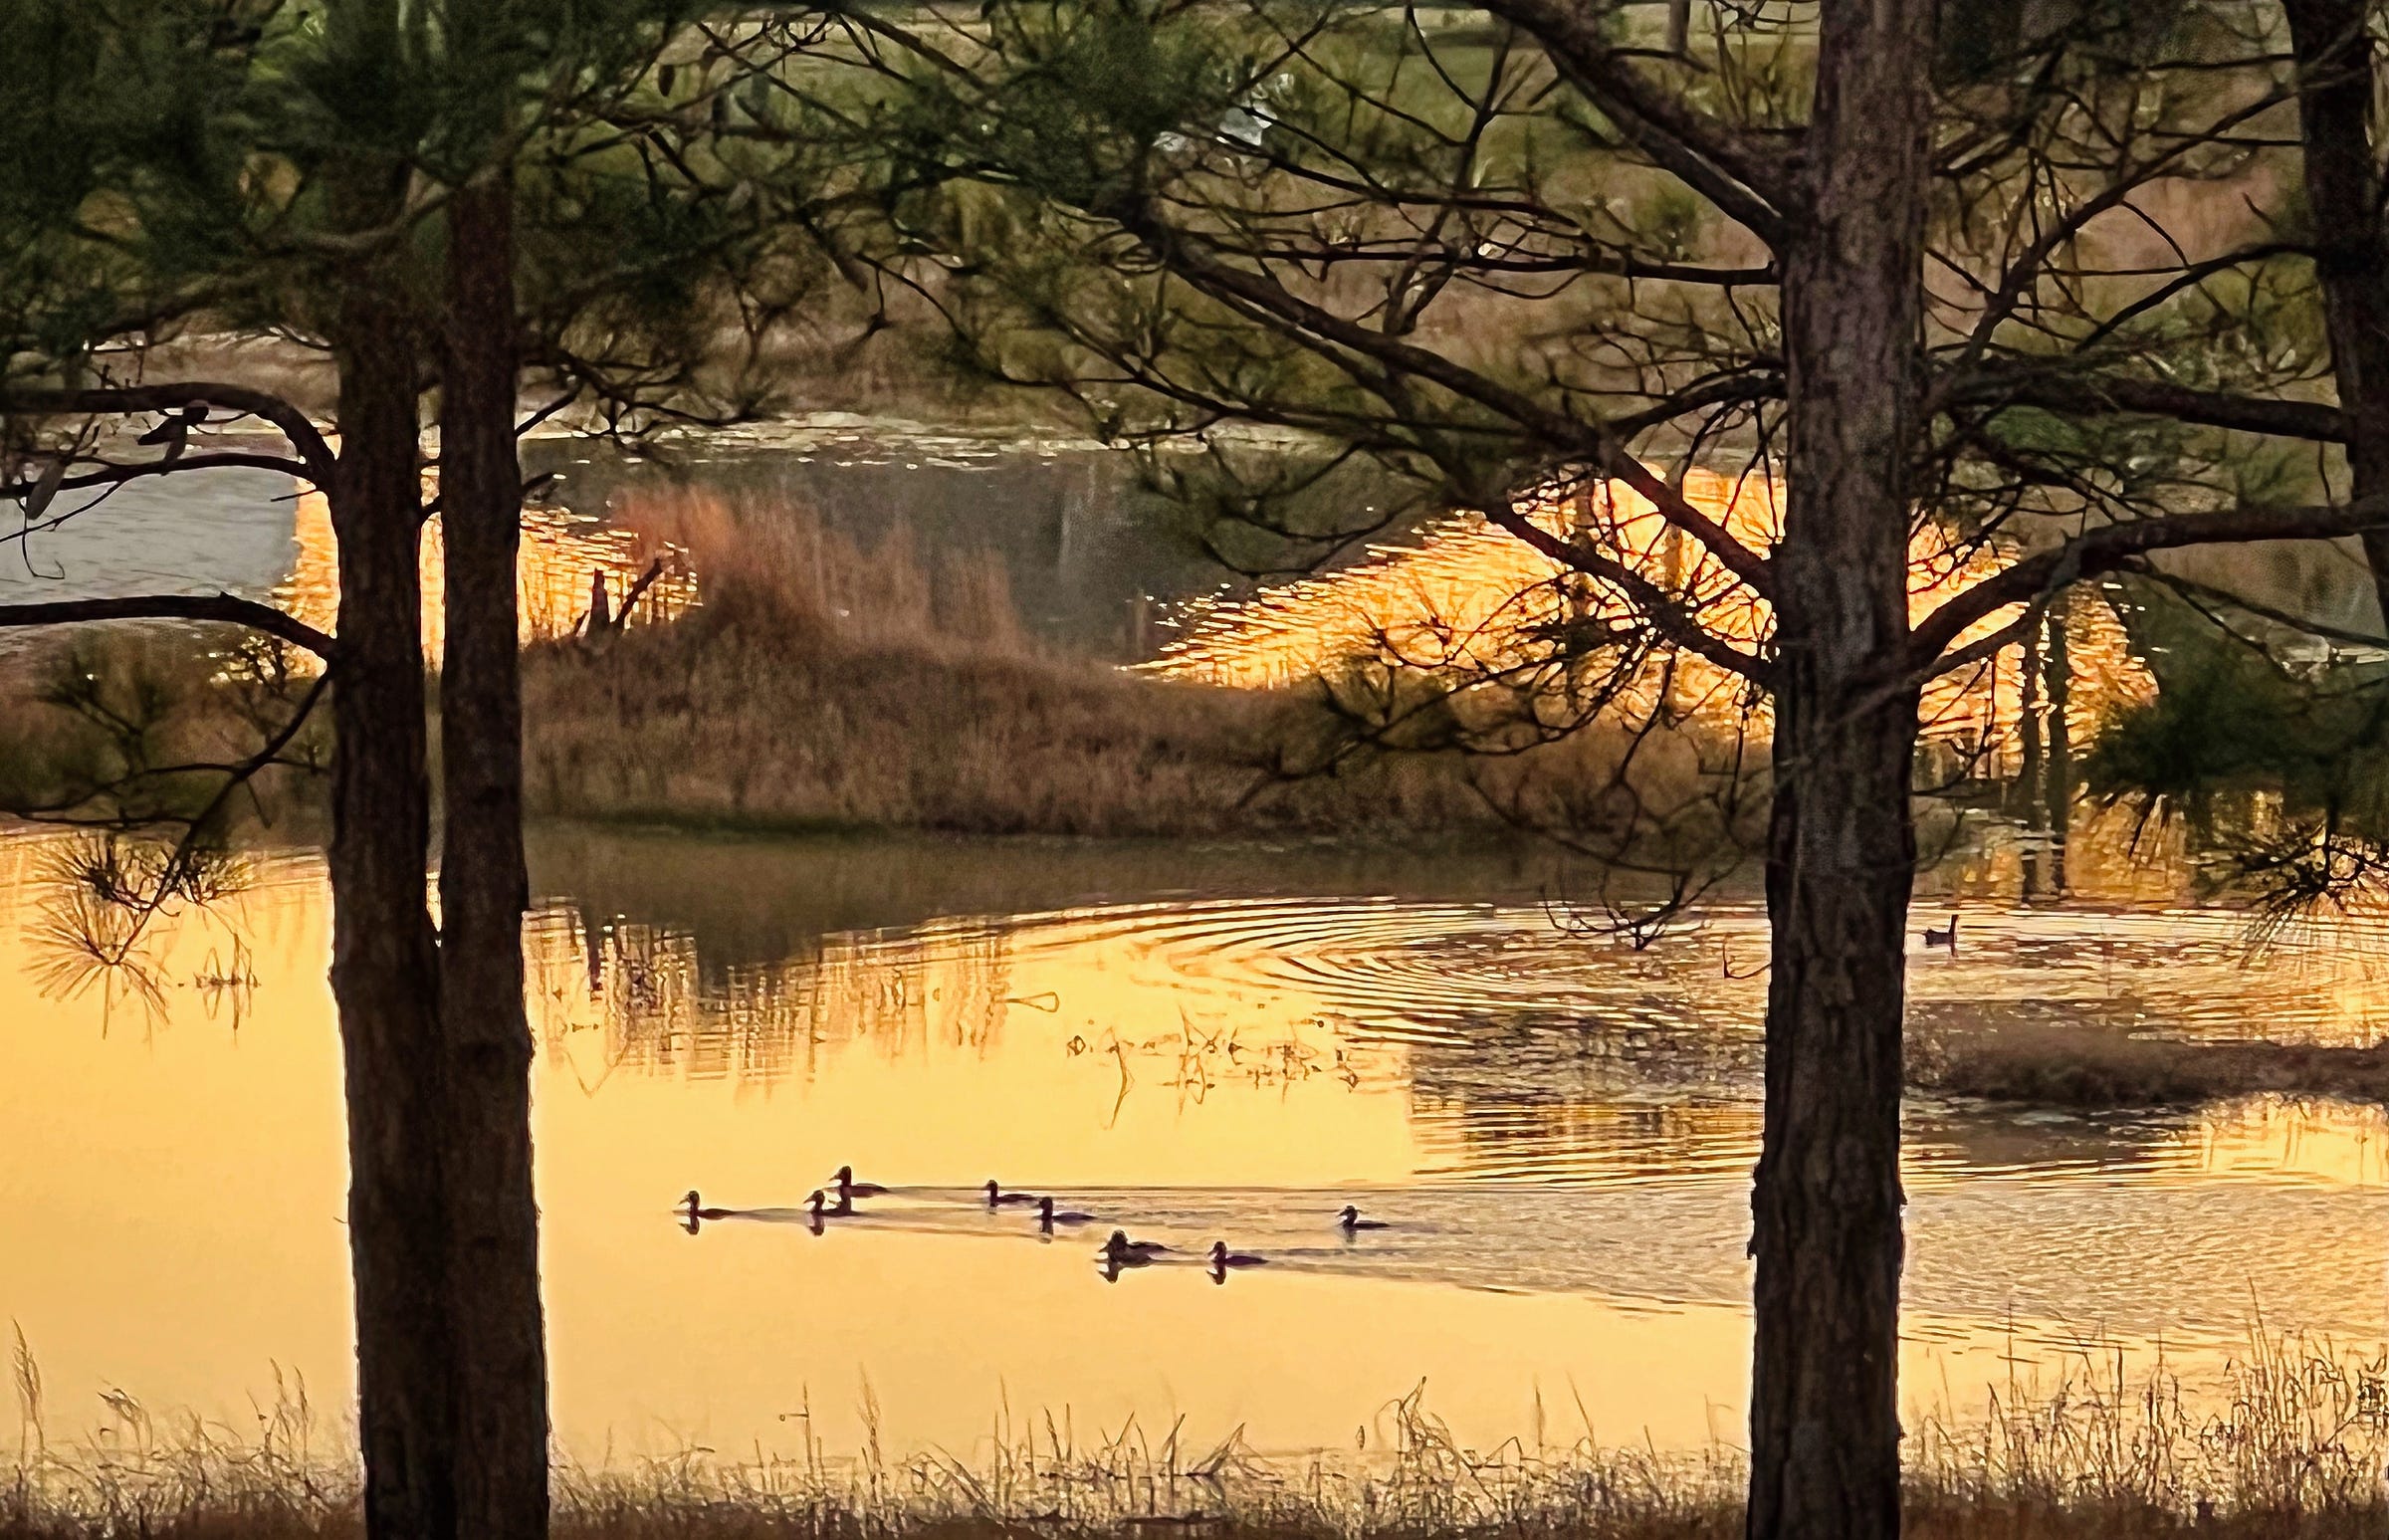 Golden light from the setting sun is reflected in the lake;ducks swimming toward the right are framed by the trunks of two pine trees